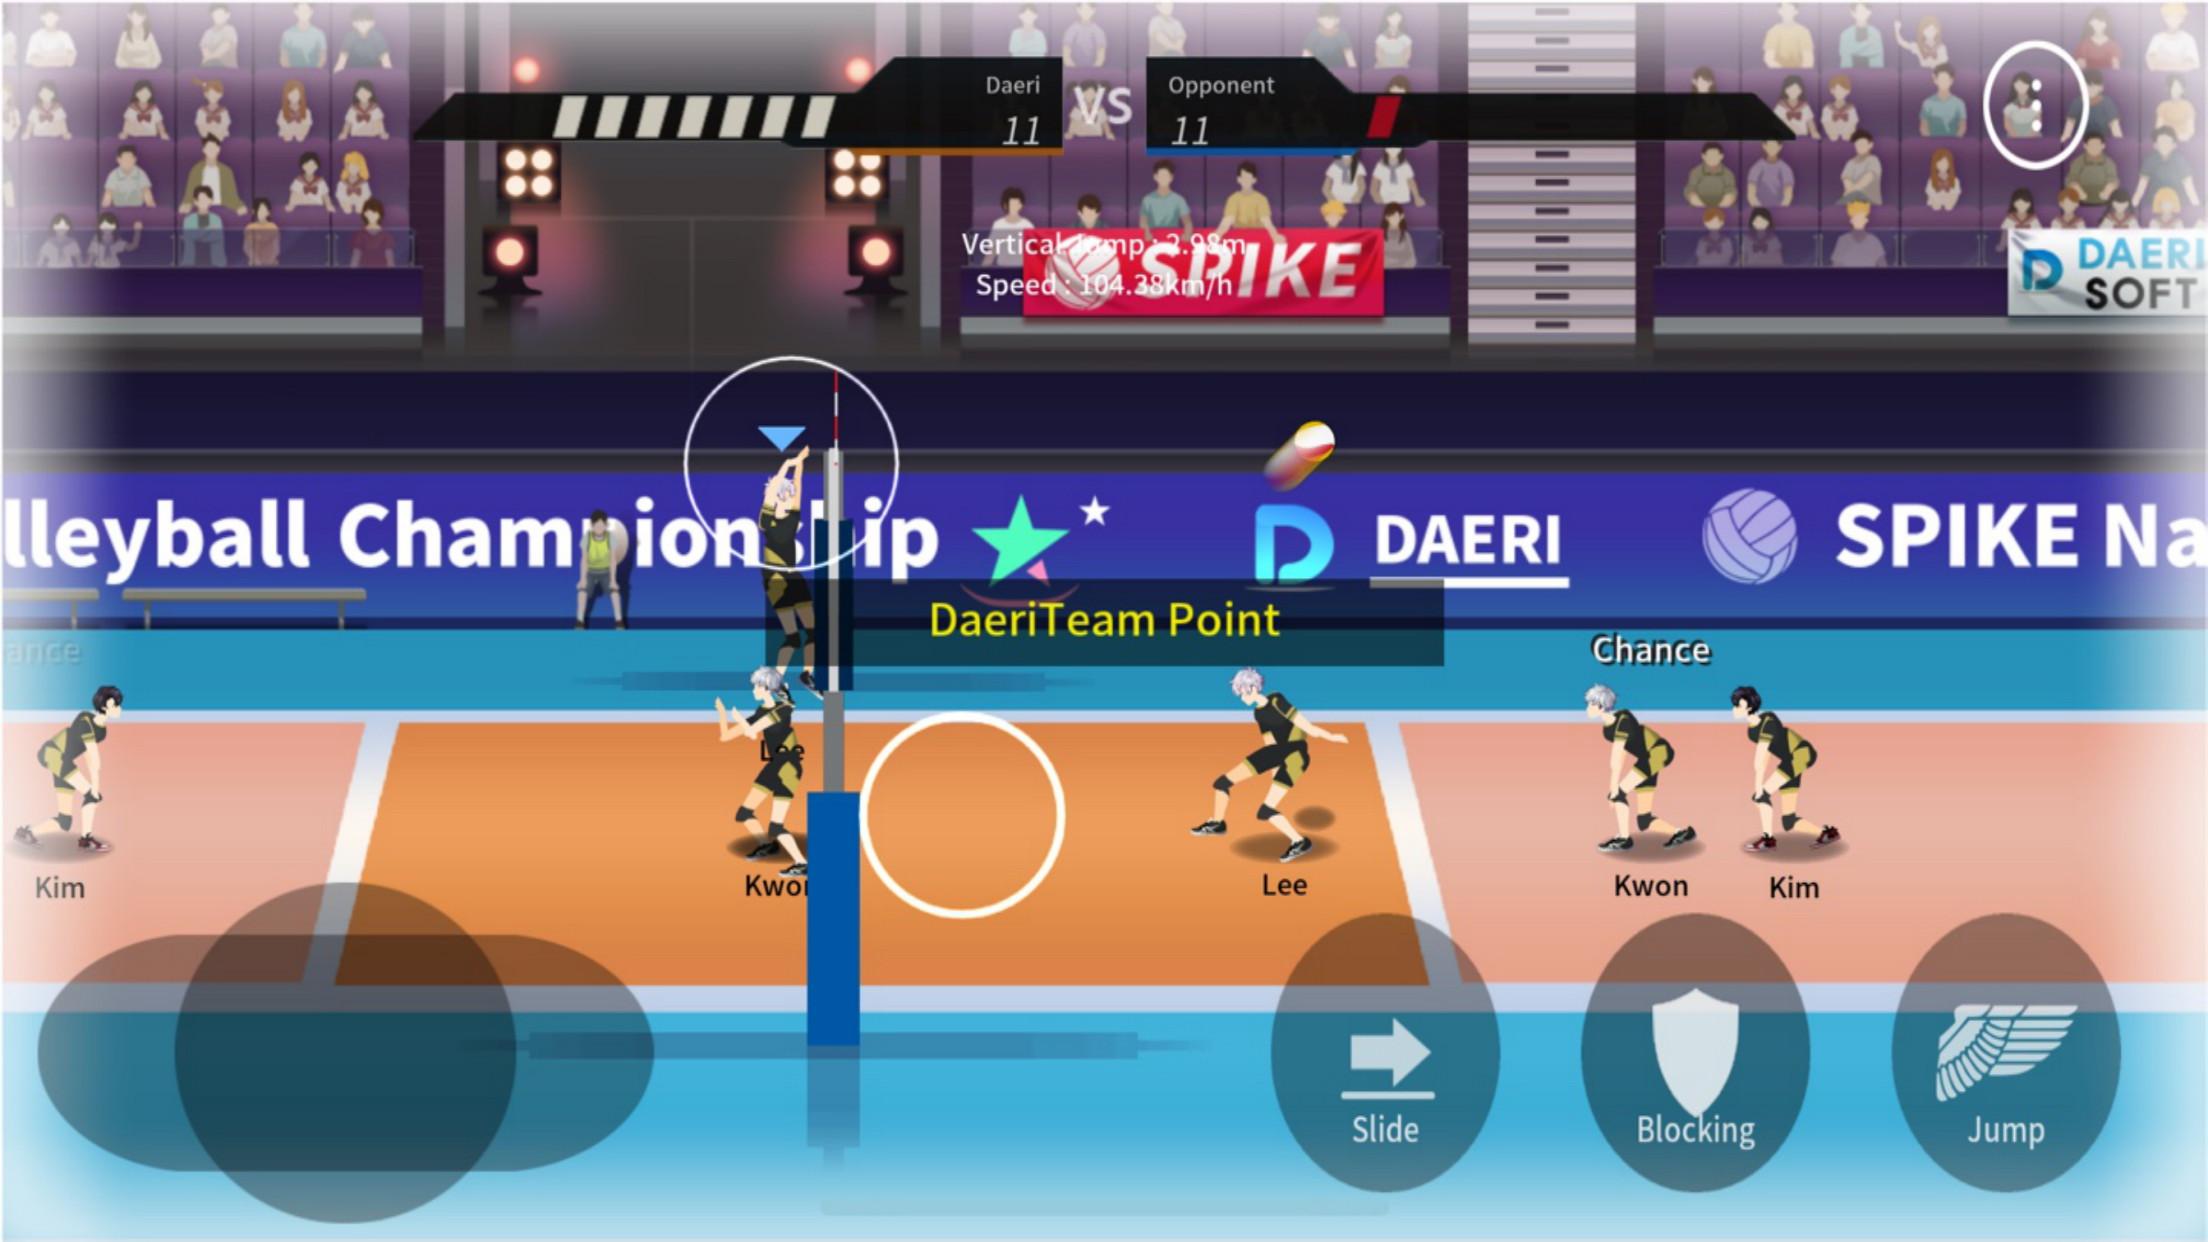 The spike volleyball story мод. The Spike Volleyball игра. The Spike Volleyball купоны. Игры про волейбол на андроид. The Spike Volleyball story.